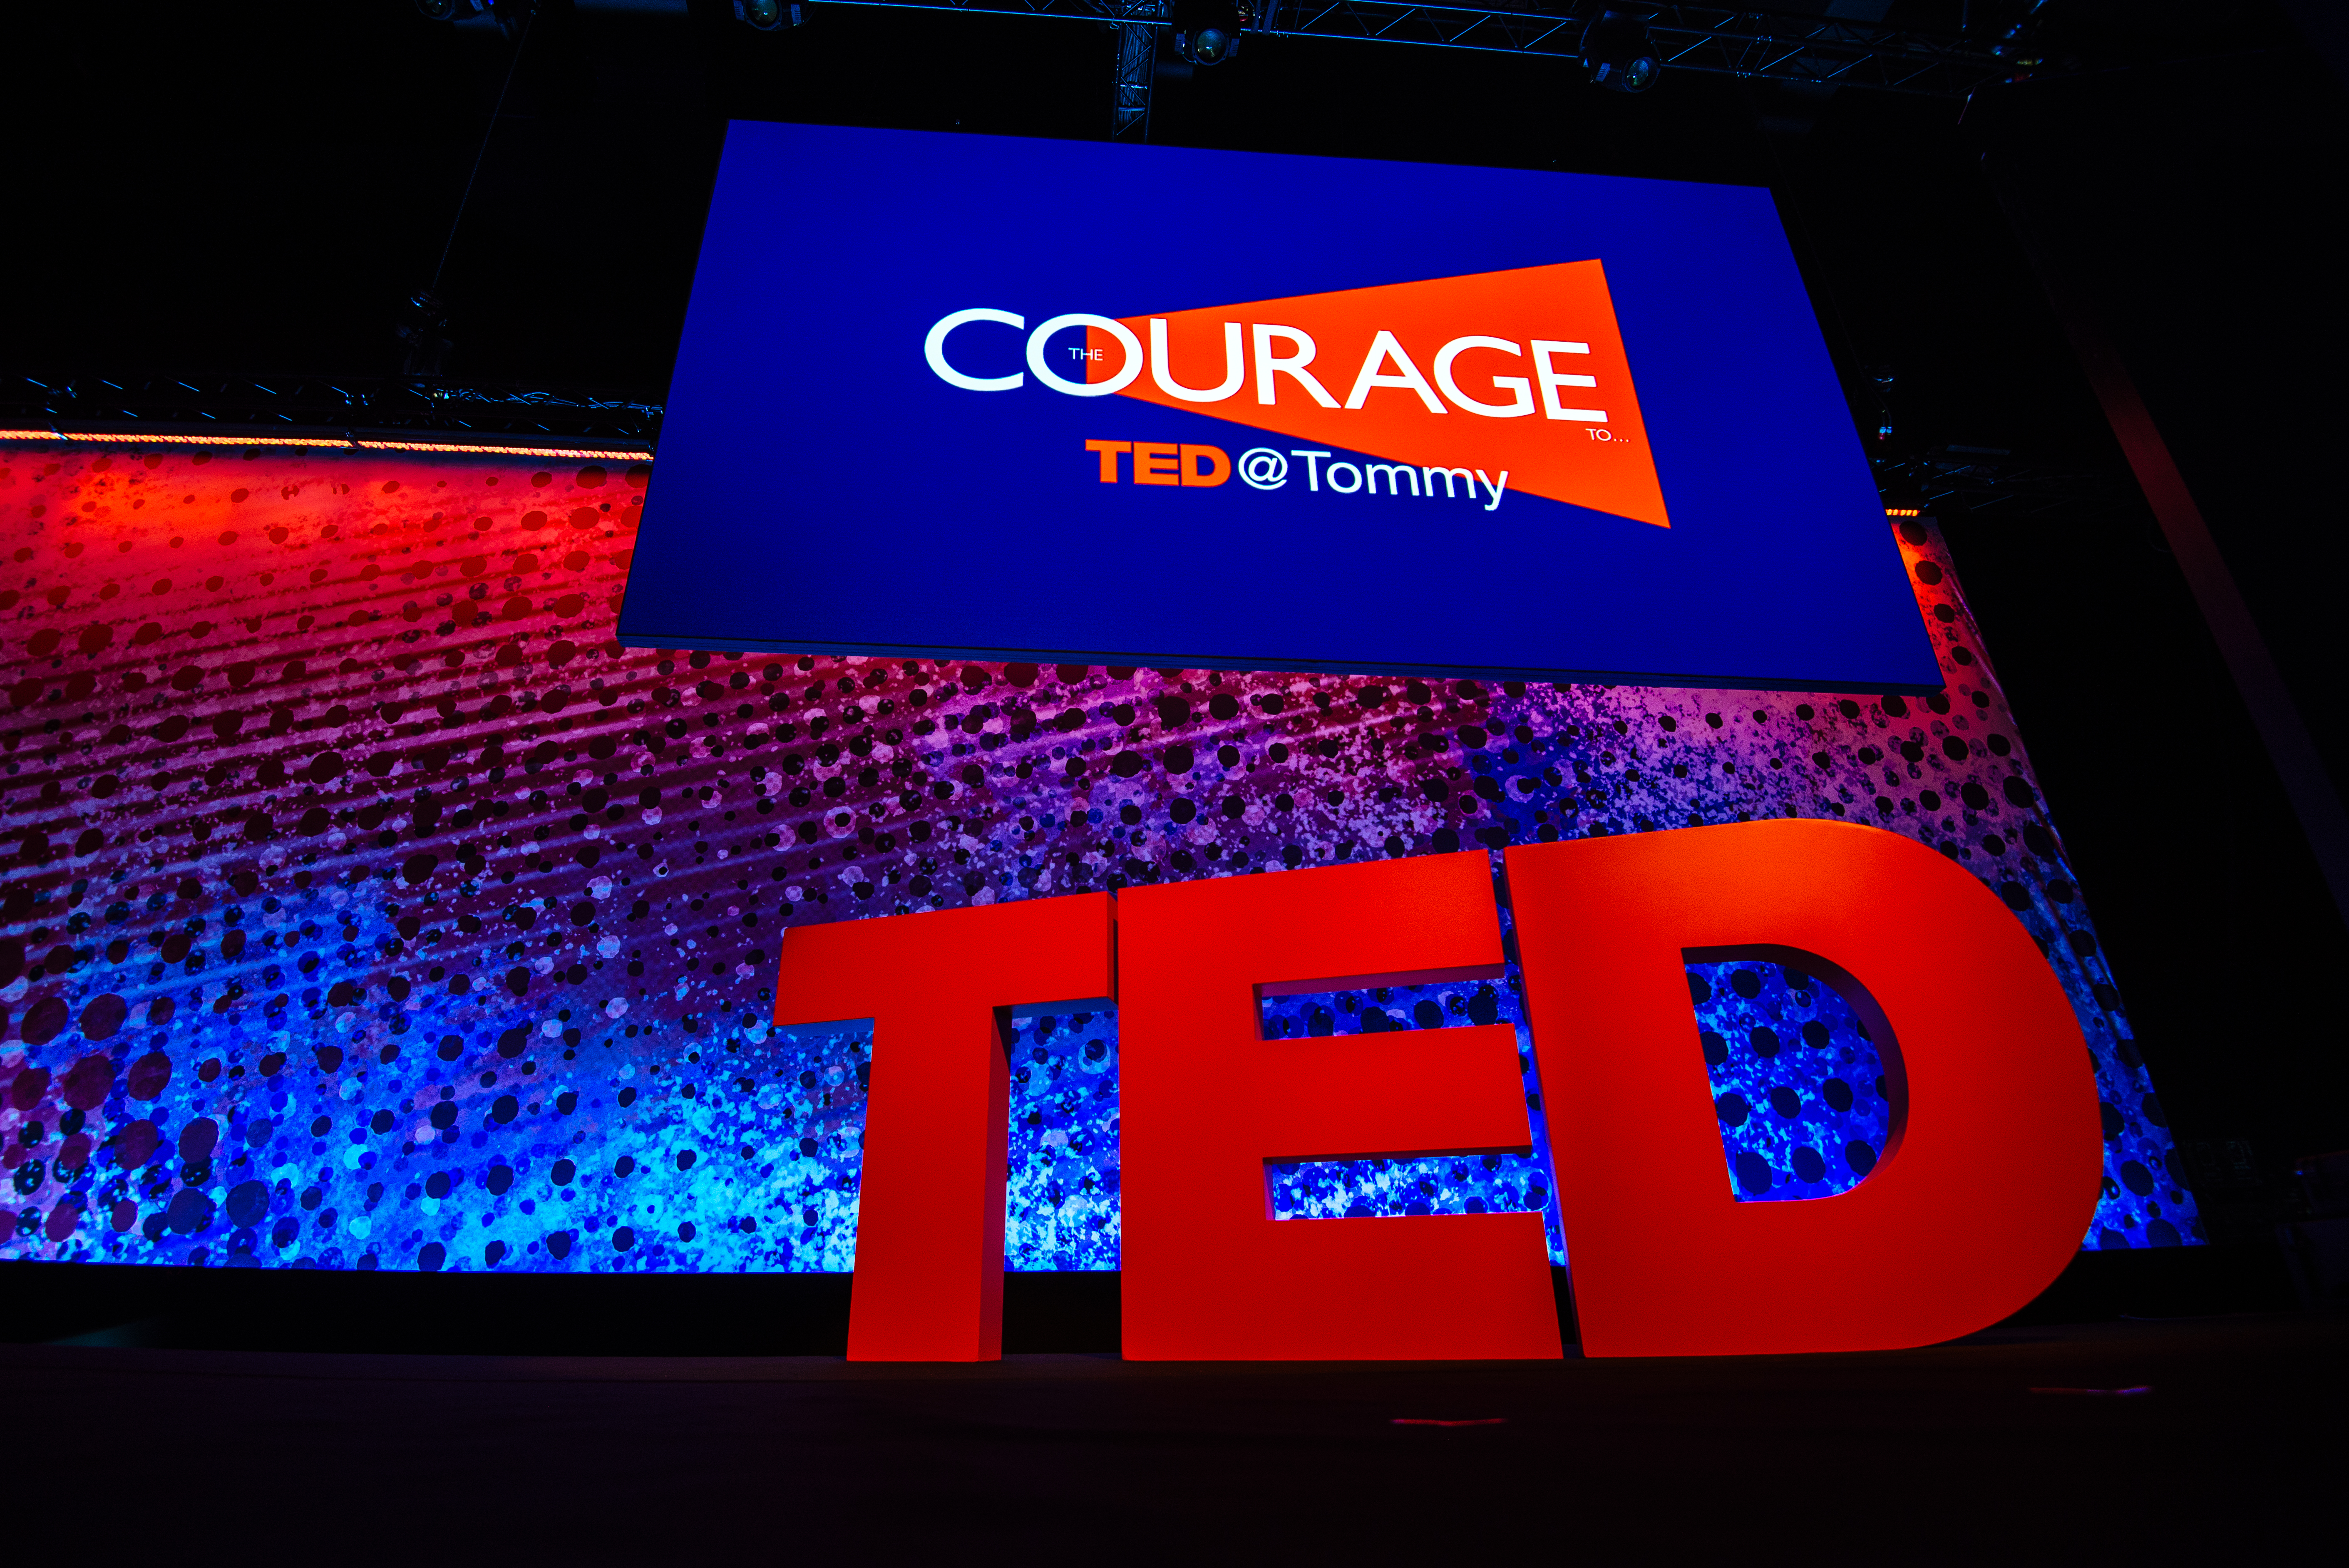 “The courage to …” The talks of TED@Tommy